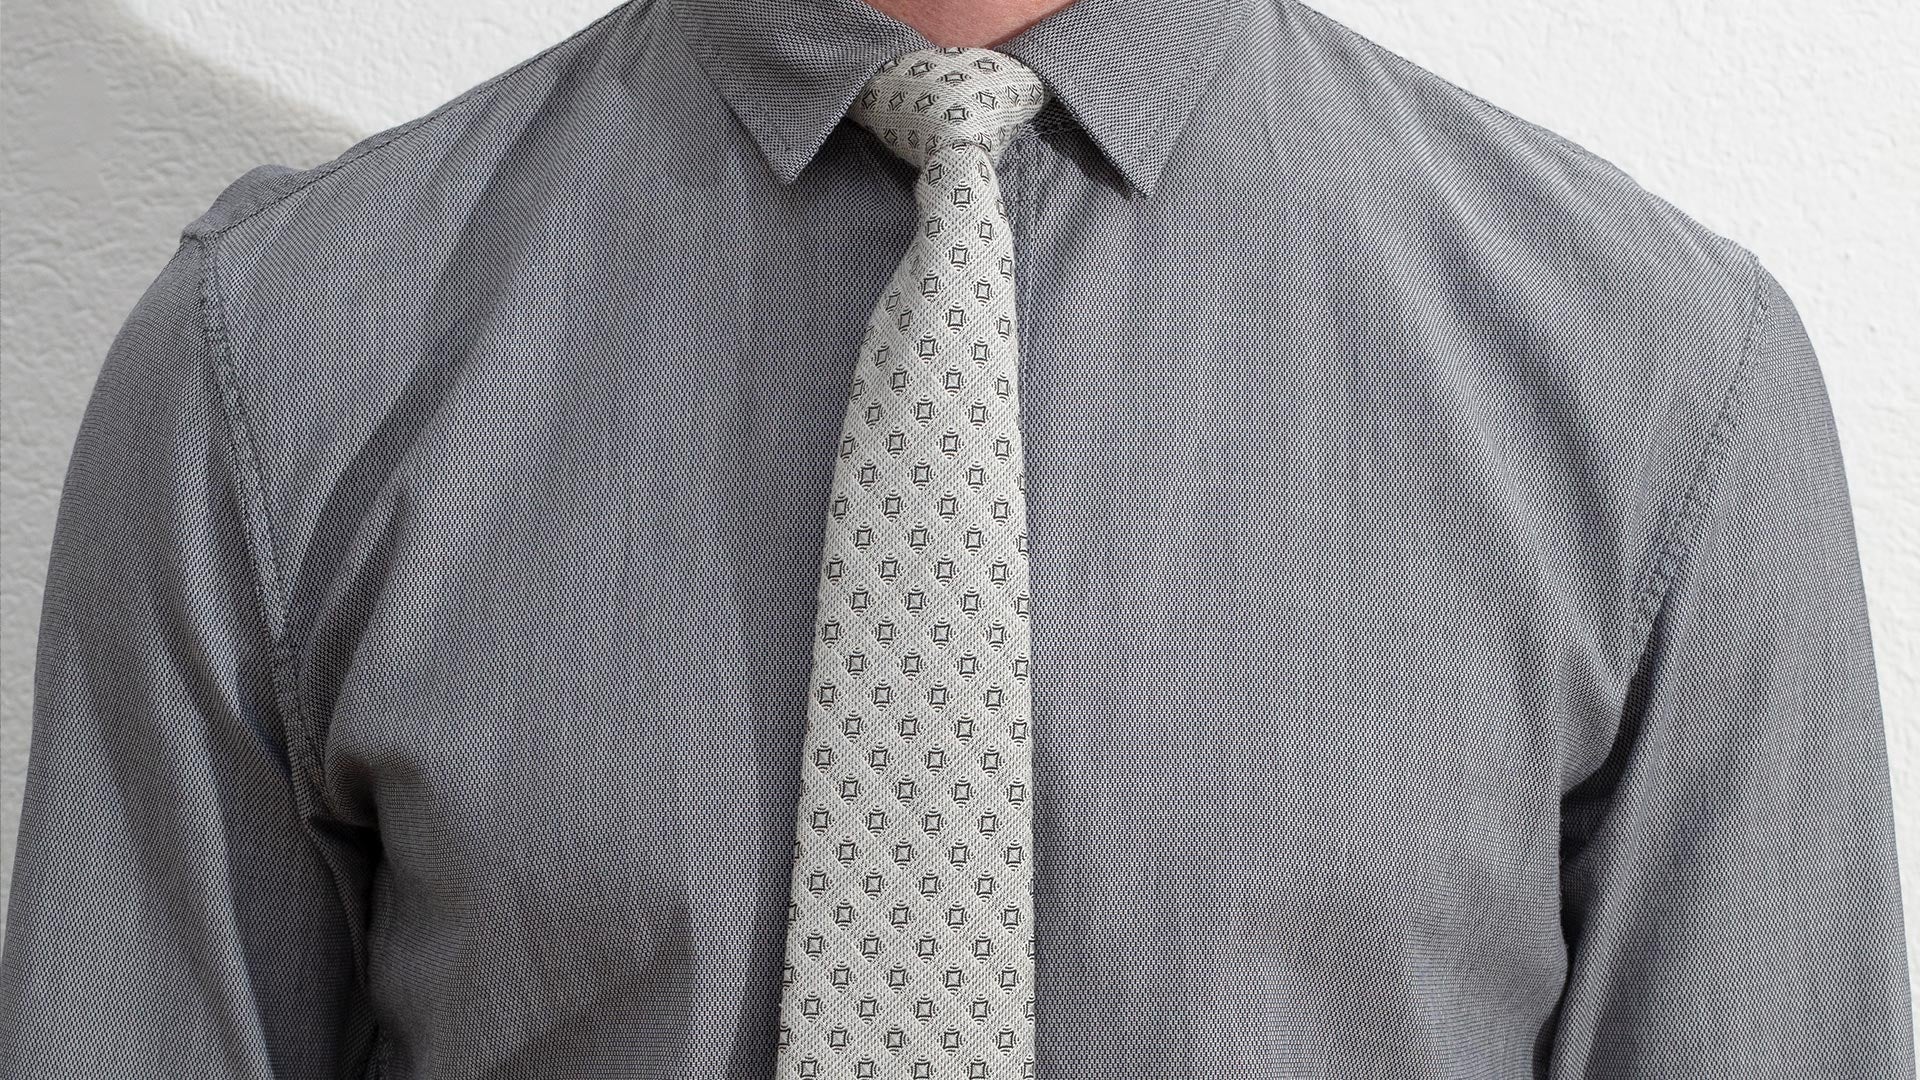 Tie readjusted